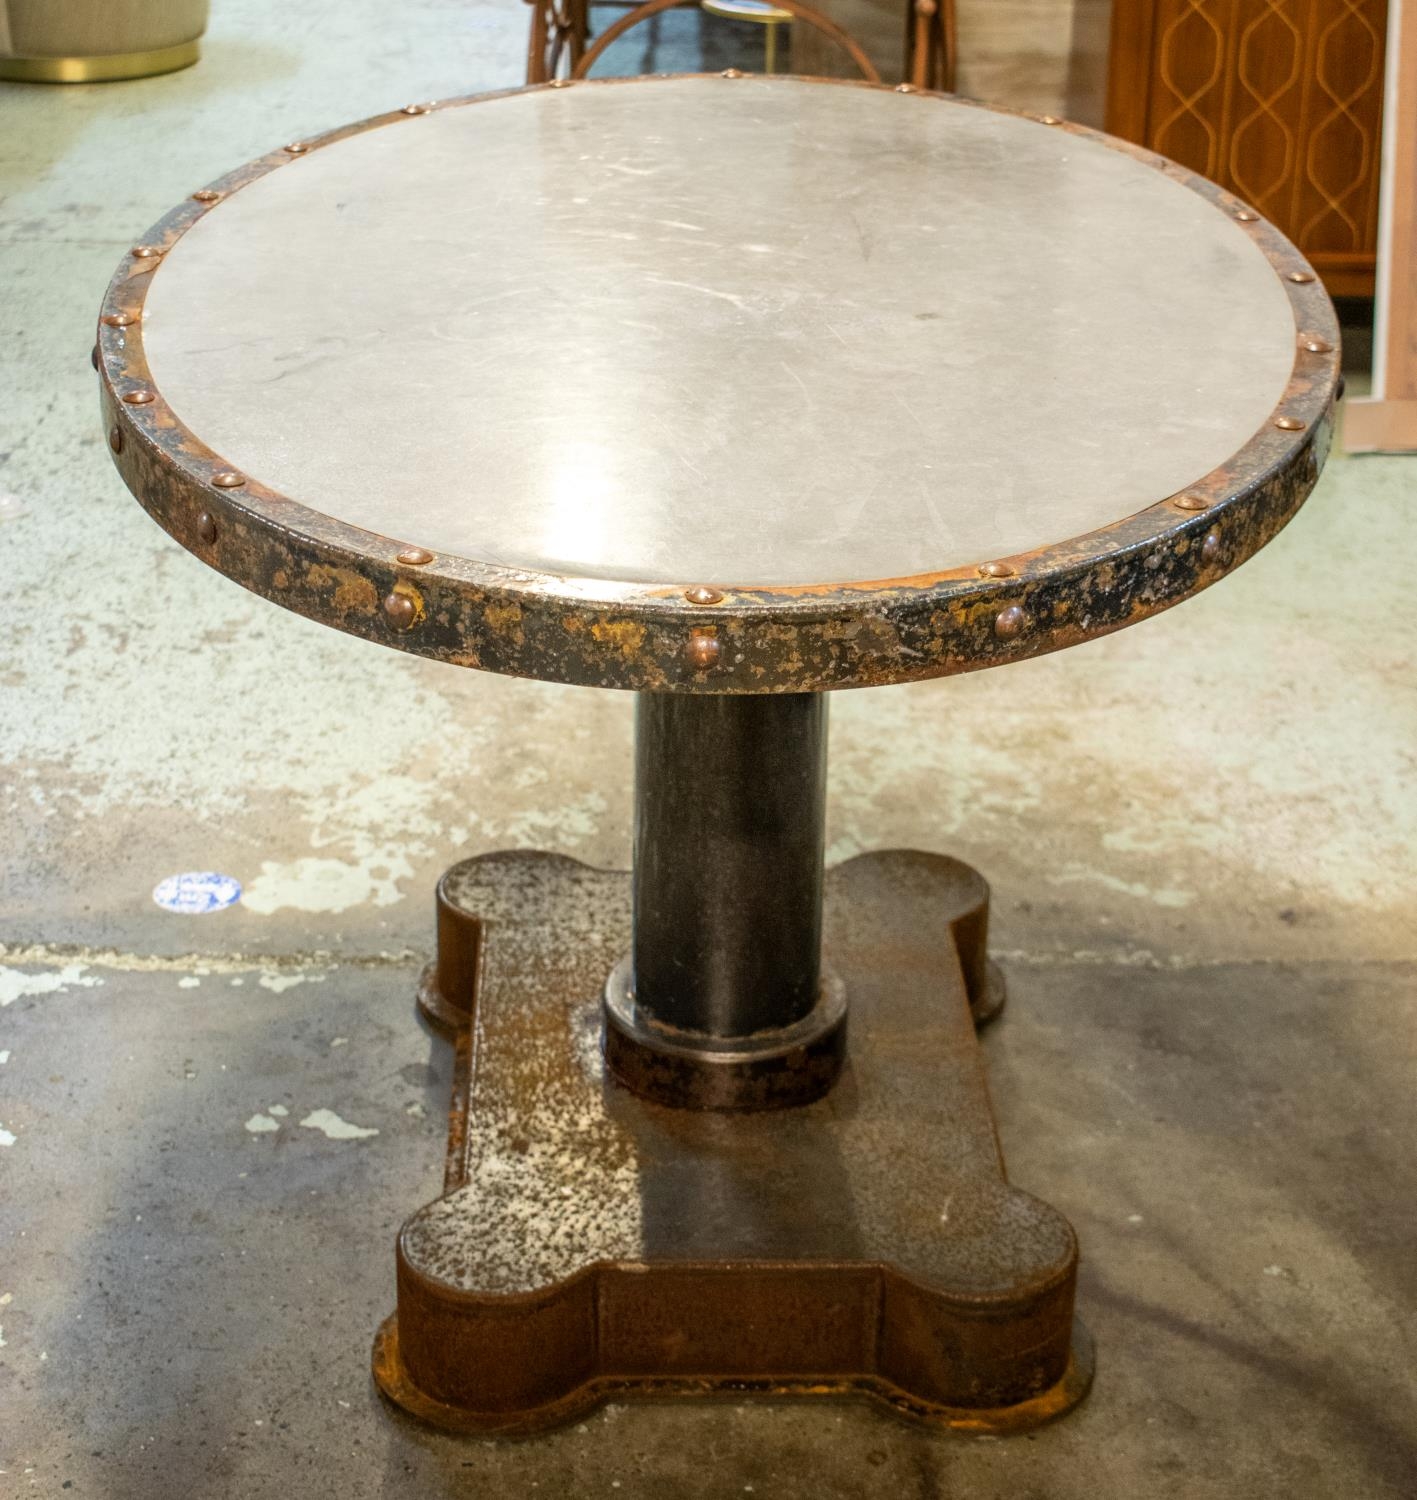 INDUSTRIAL TABLE, 77cm H x 130cm x 88cm, mid 20th century metal with oval top on pedestal base. - Image 2 of 5